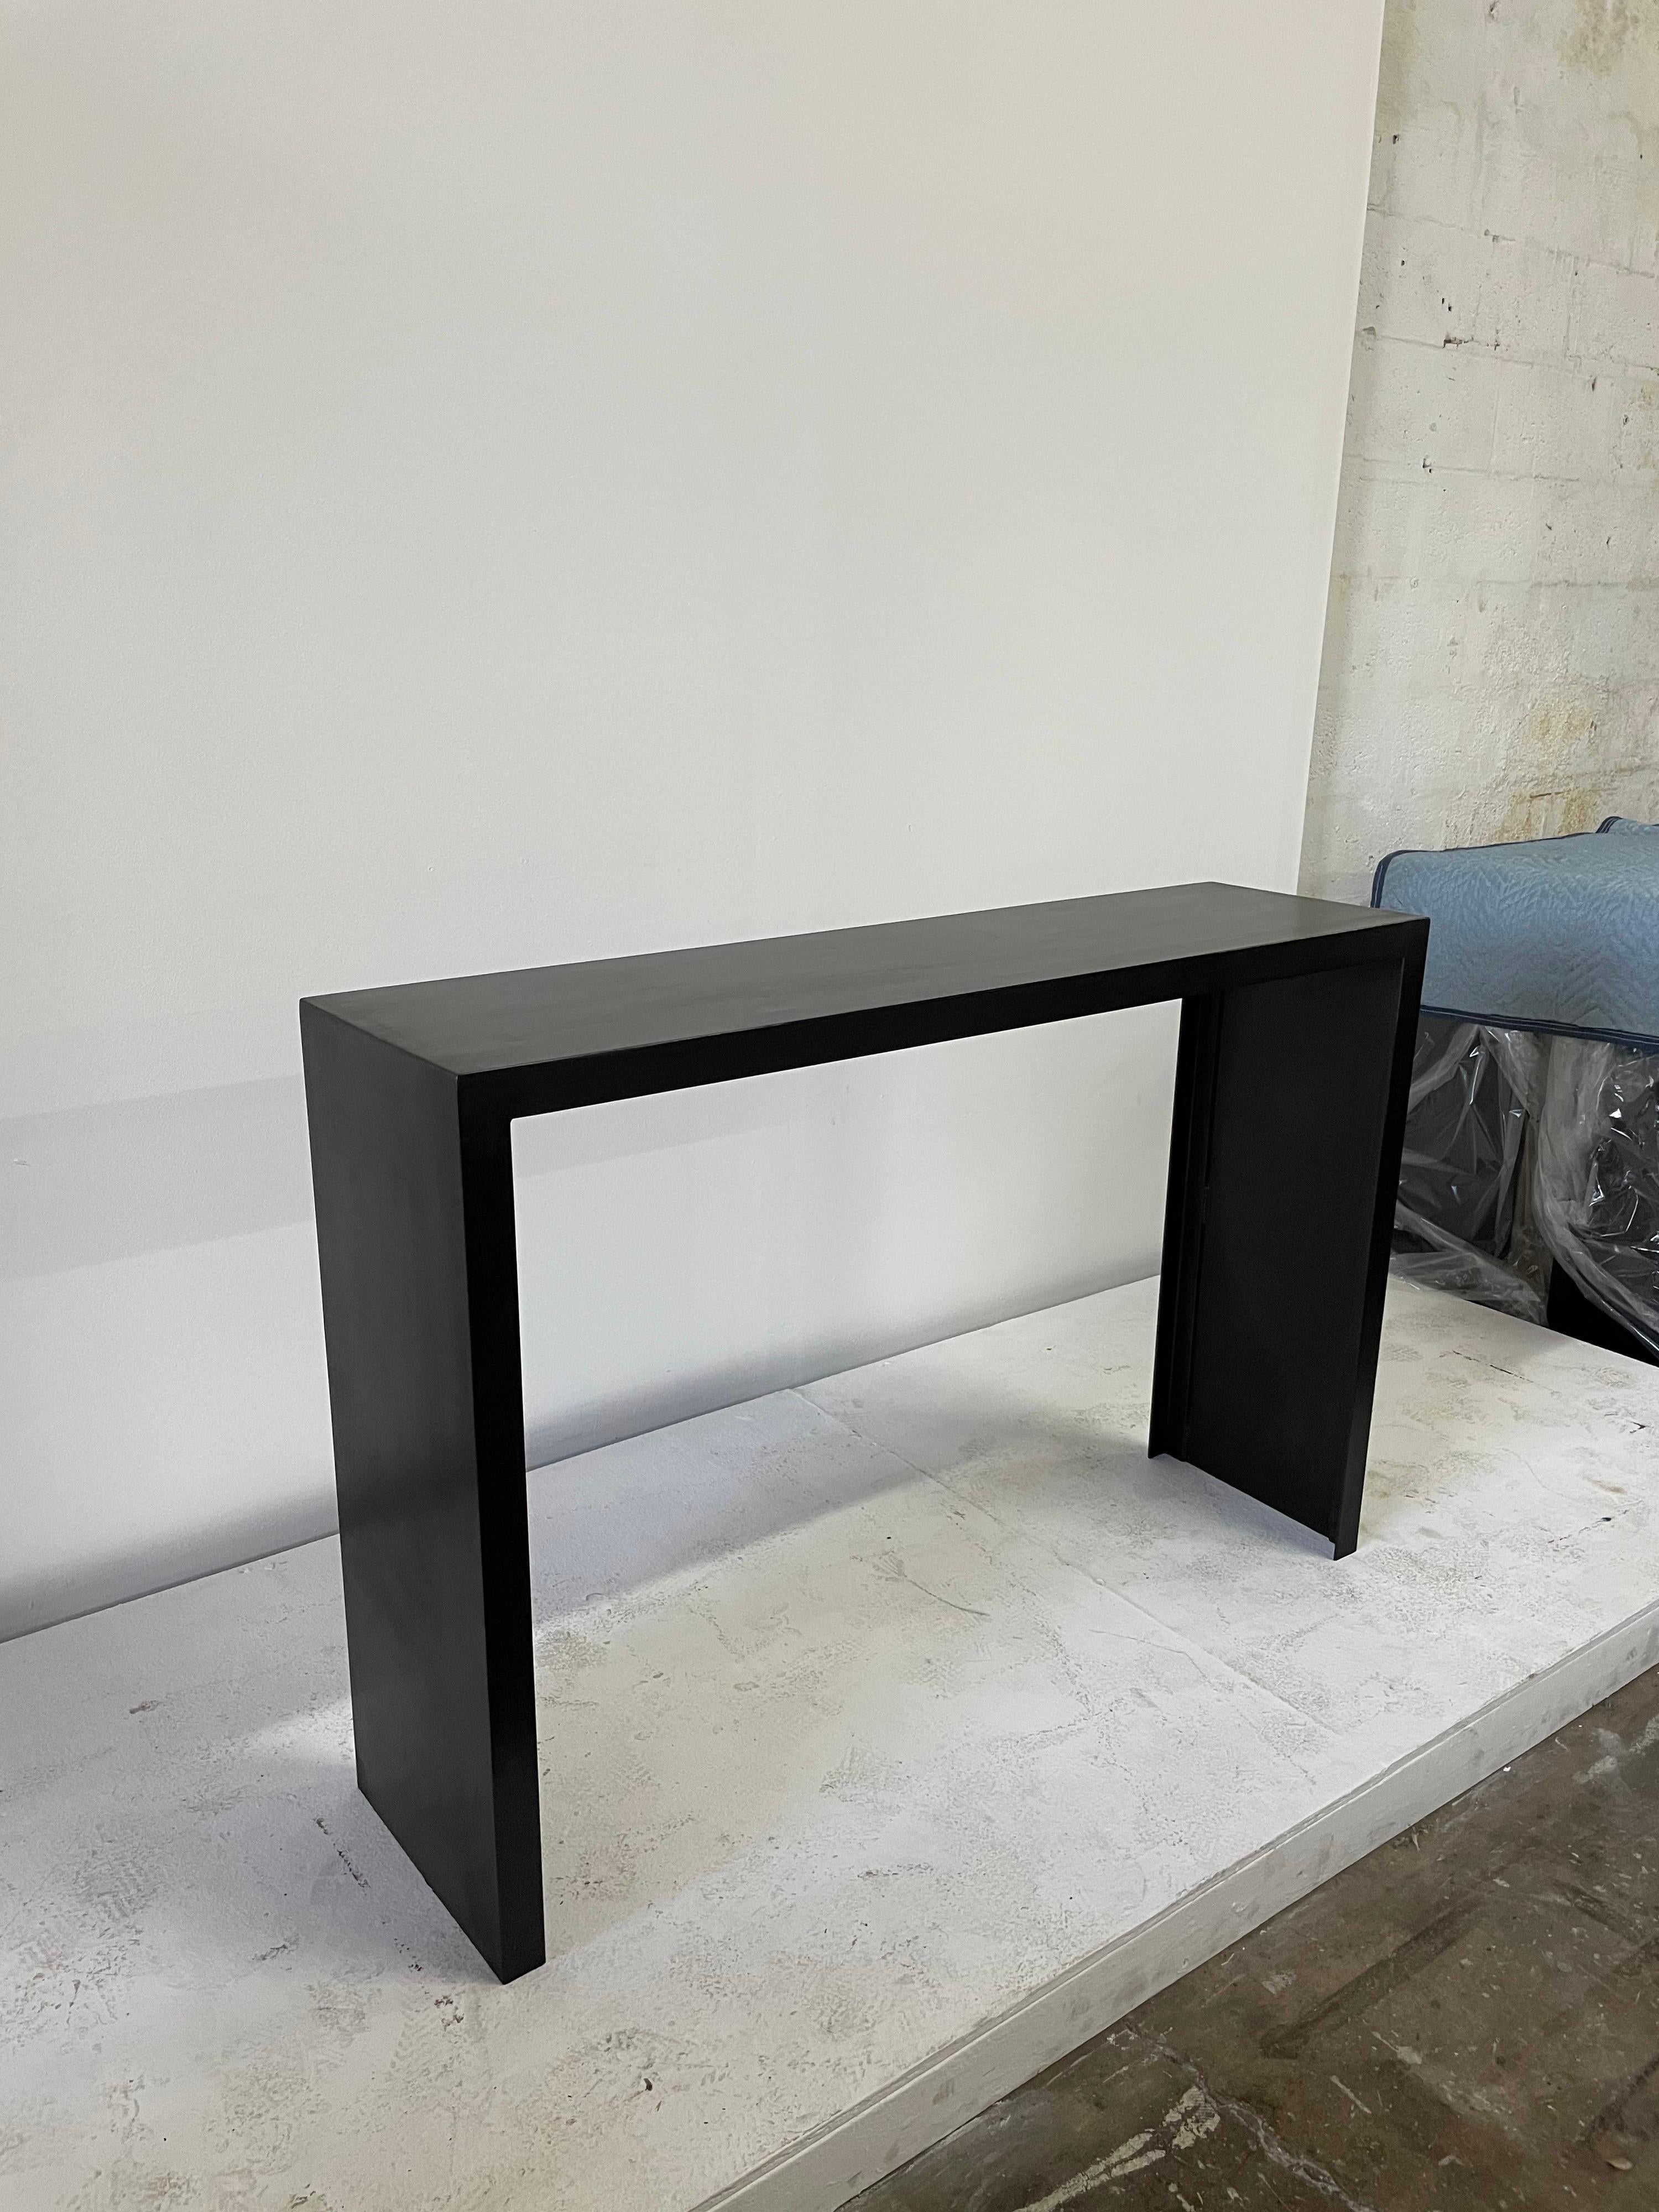 49 inch Long classic JMF style heavy iron console table. Showing Industrial metal signs and spots with matte dark wax finish. Not a perfect consistent finish which is how it was created and meant to be. Made and designed for Gustavo Olivieri Studio.